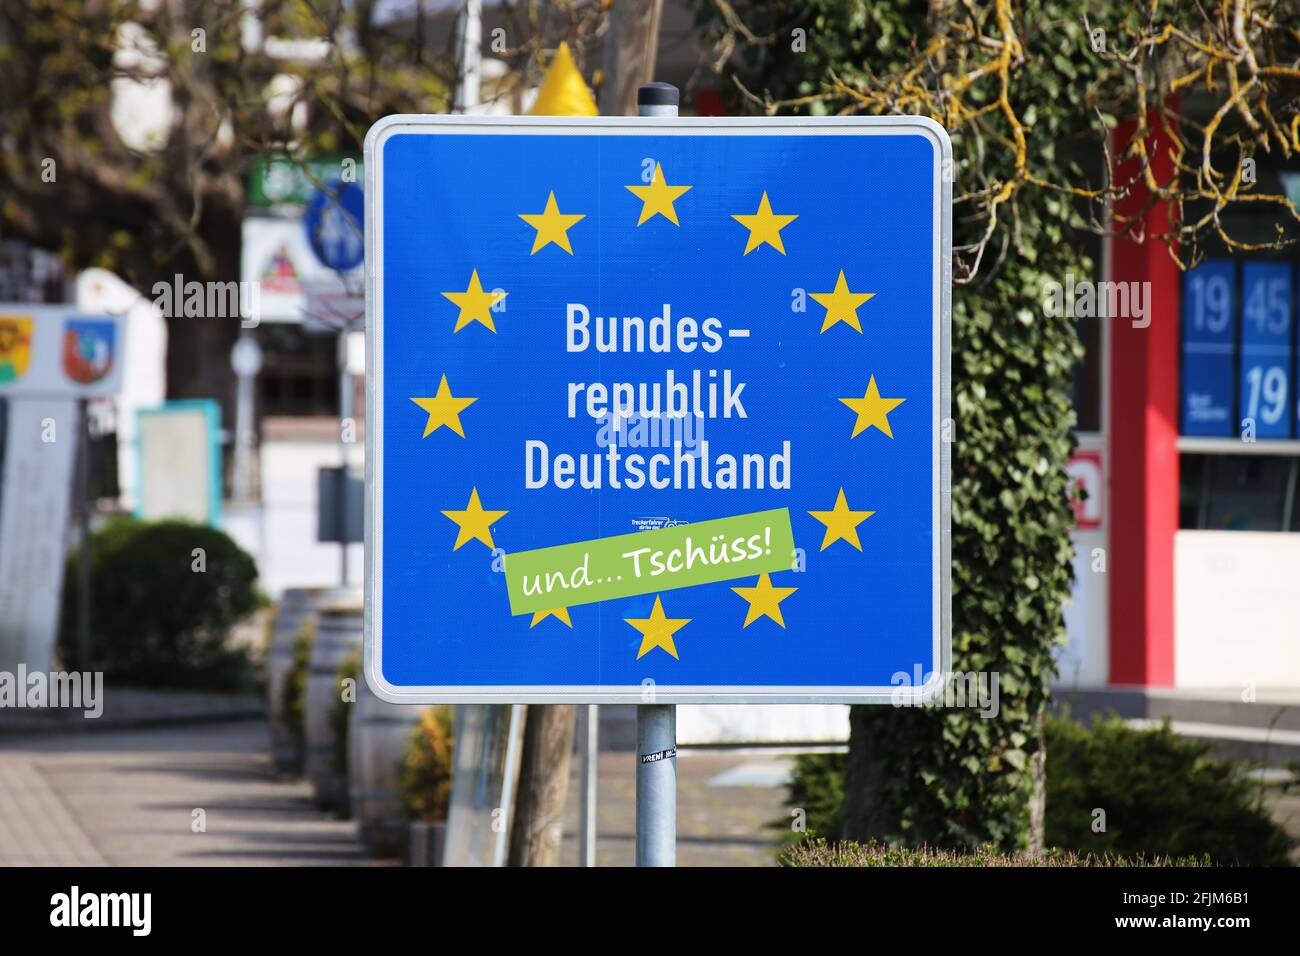 Symbolic image Emigration: Border sign of the Federal Republic of Germany with 'und tschüss' (goodbye) sticker Stock Photo